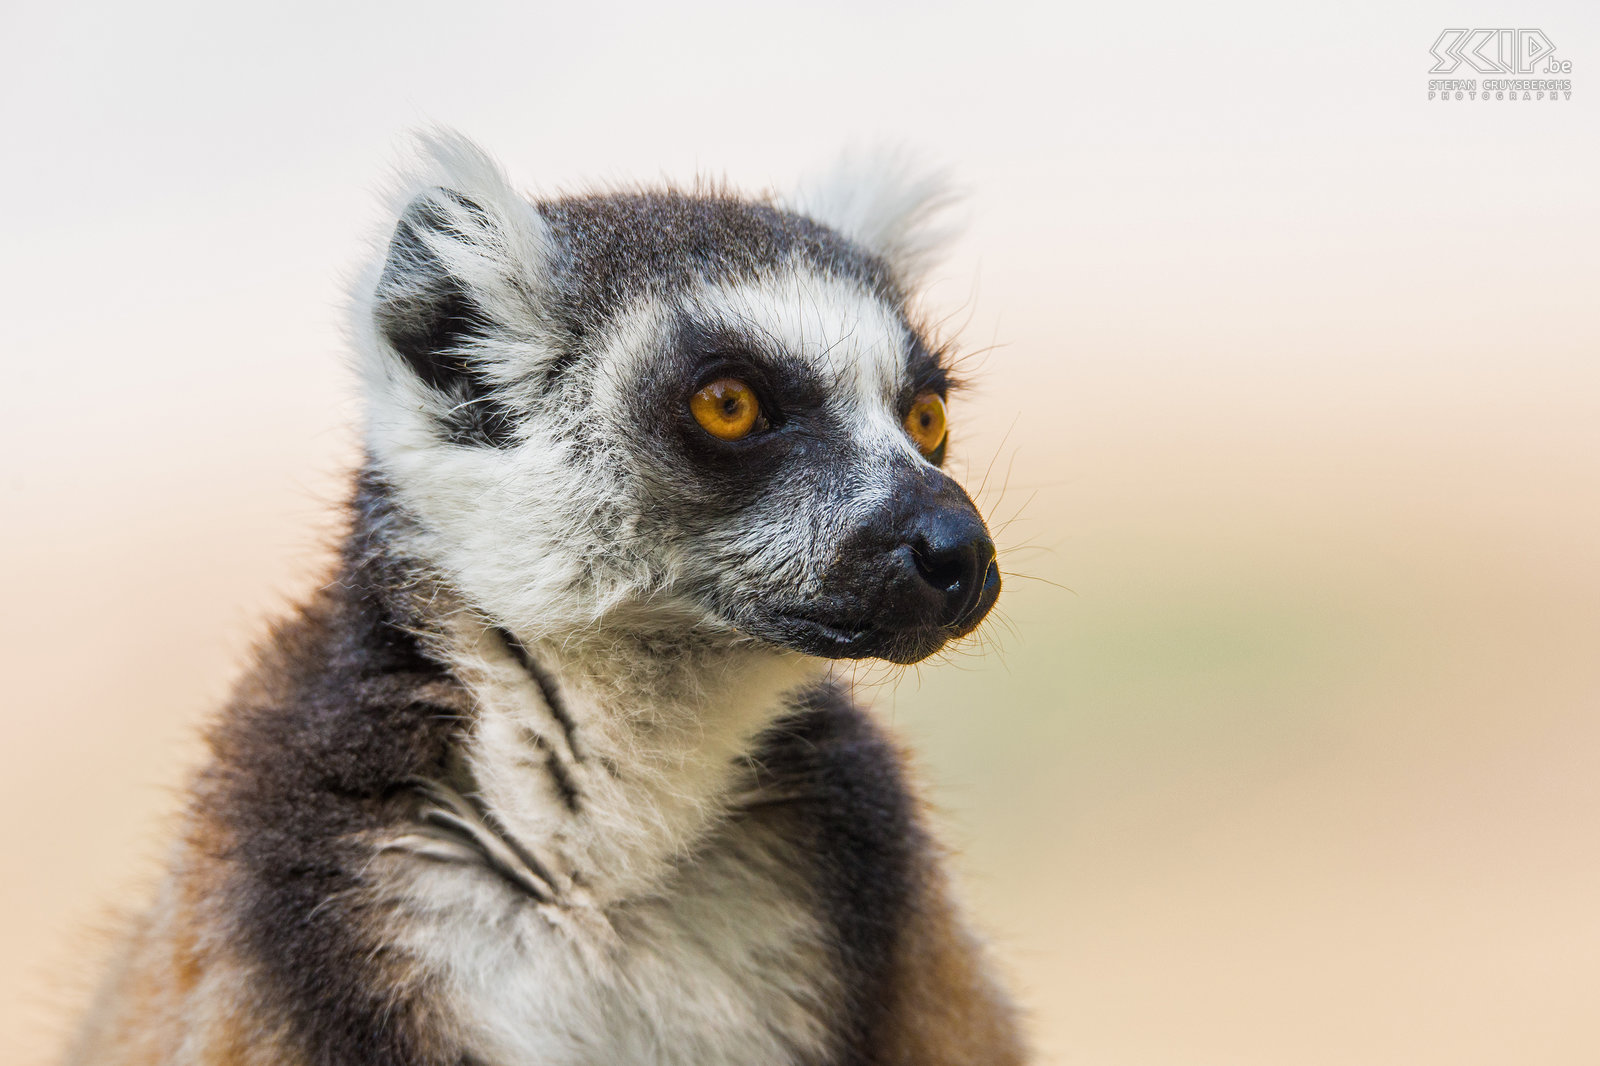 Anja - Close-up ring-tailed lemur The ring-tailed lemur is known locally in Malagasy as maky. And also in French and Dutch lemurs are mostly called maki. Stefan Cruysberghs